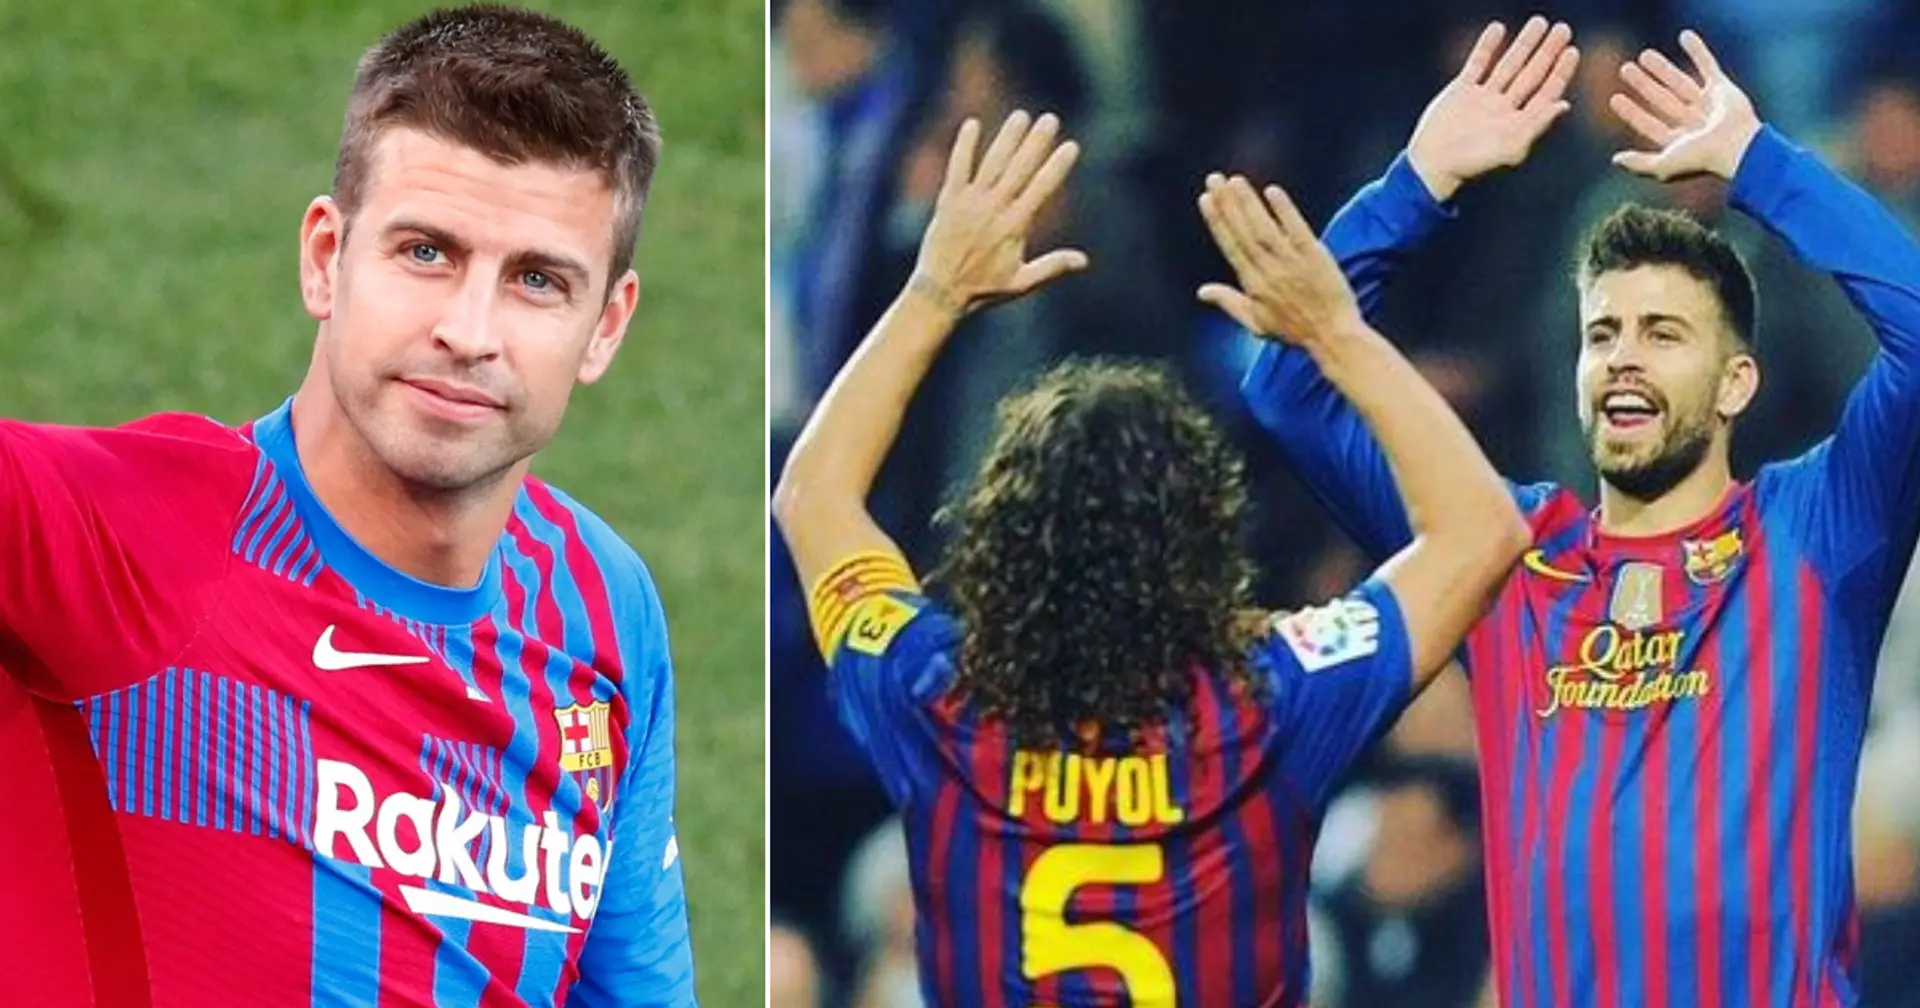 'Commitment': Carles Puyol hails Pique for accepting pay-cut